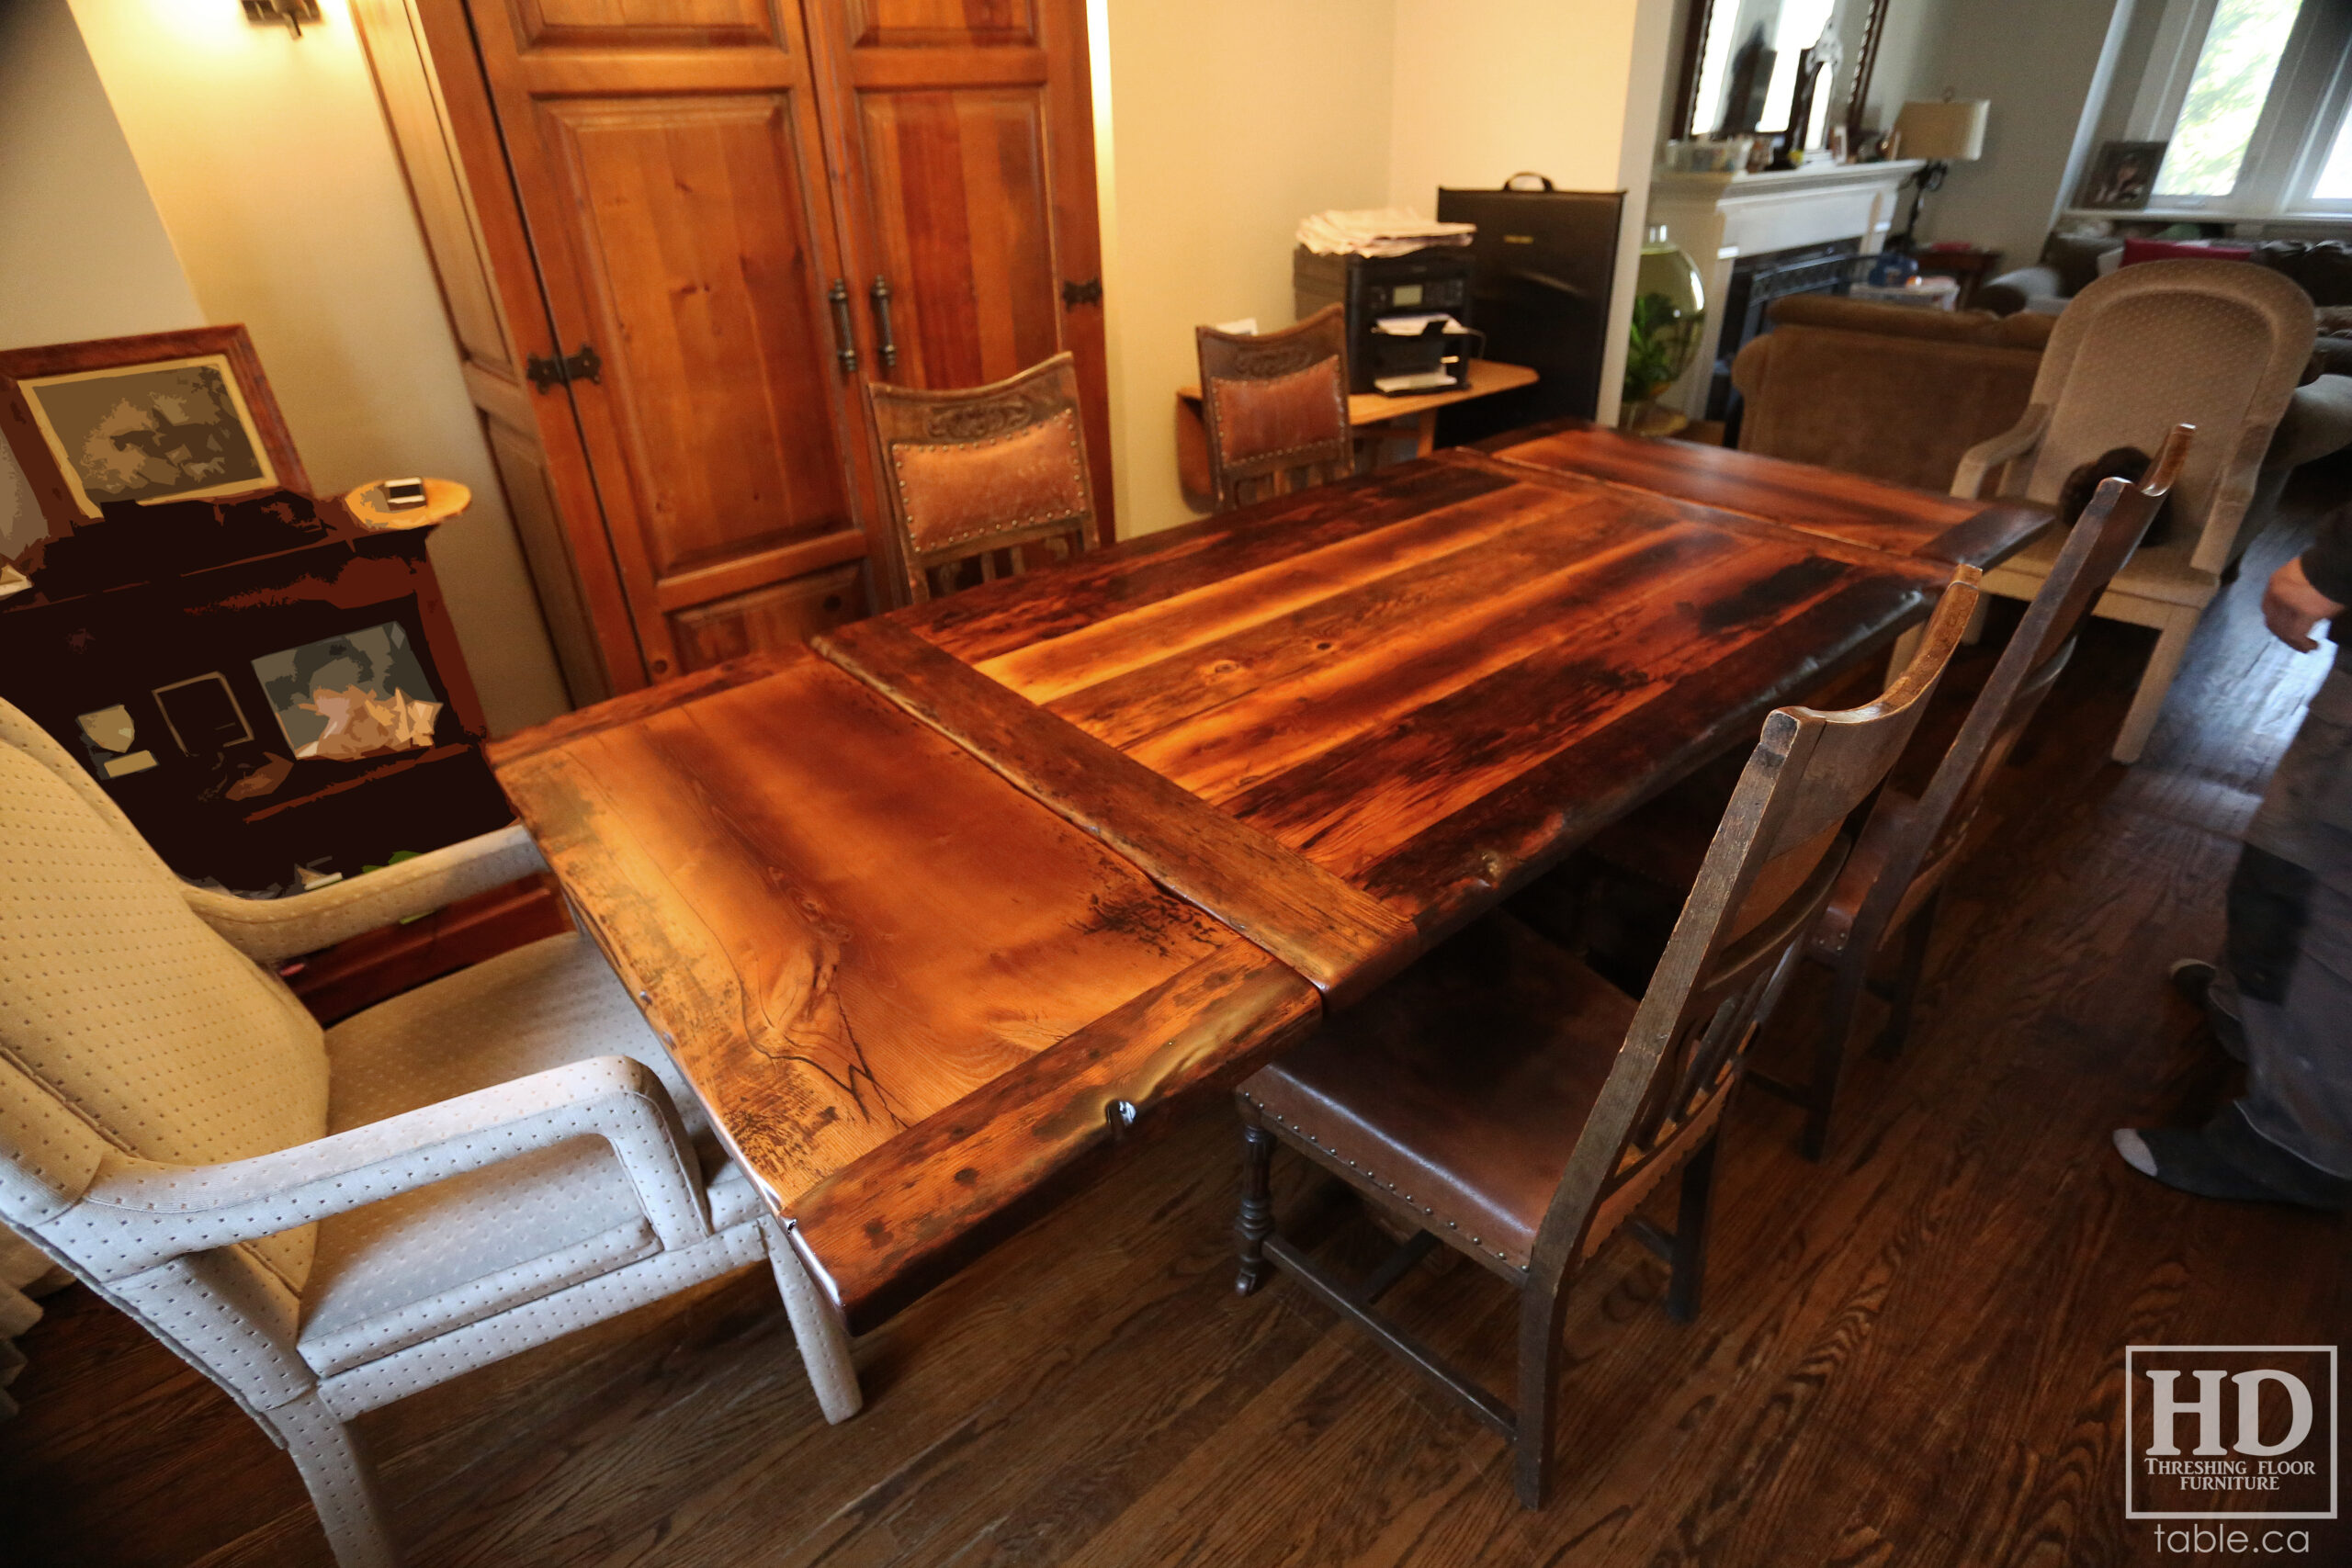 Reclaimed Wood Table with Epoxy + Polyurethane Finish by HD Threshing Floor Furniture / www.table.ca